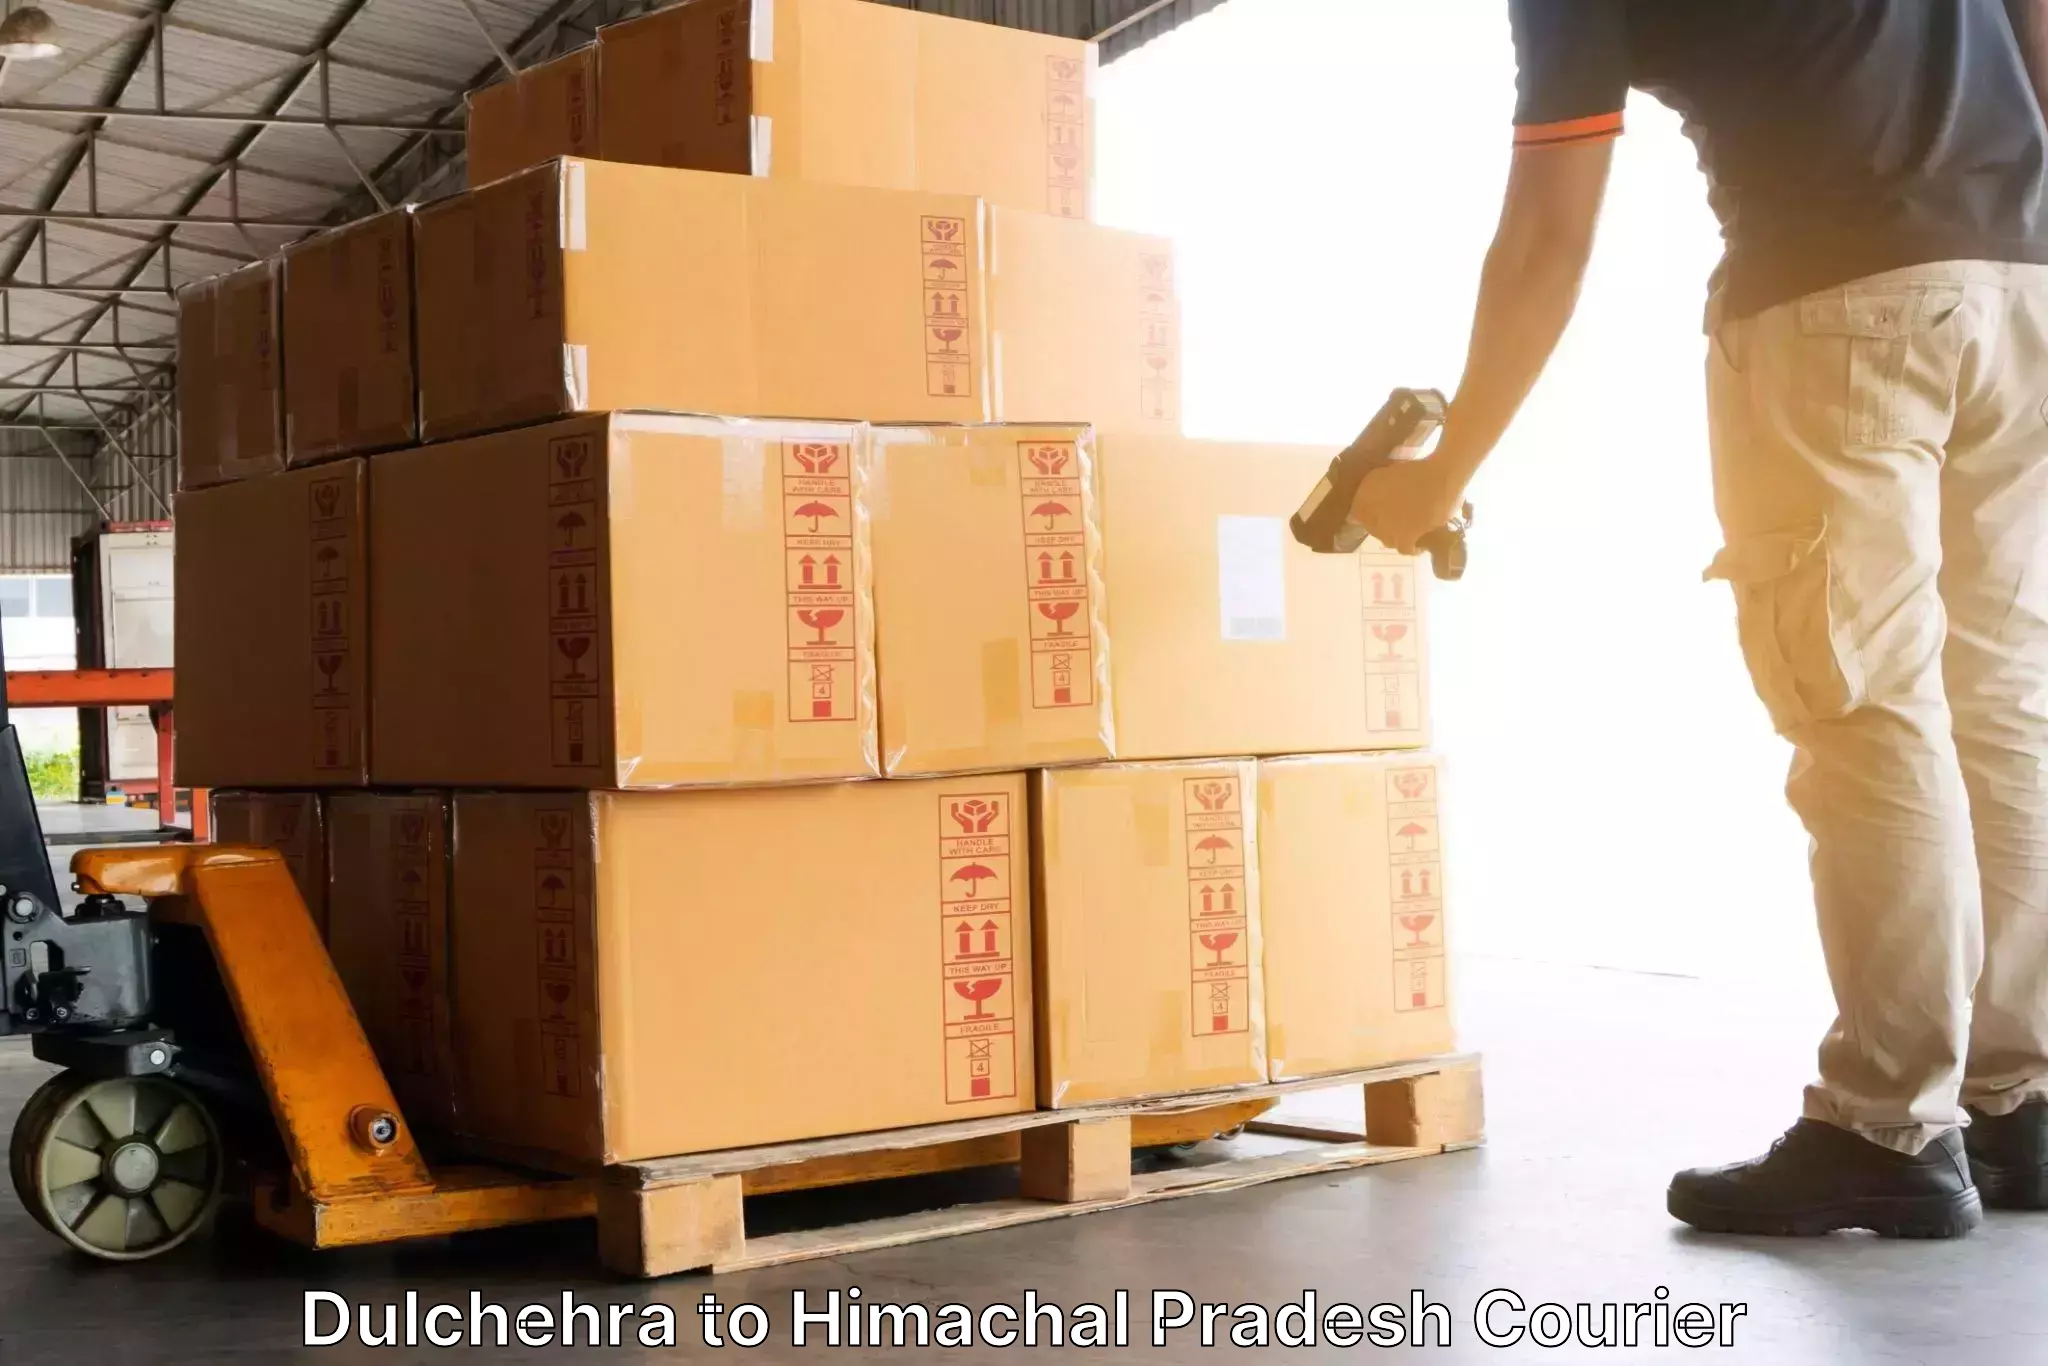 Advanced parcel tracking Dulchehra to Dheera